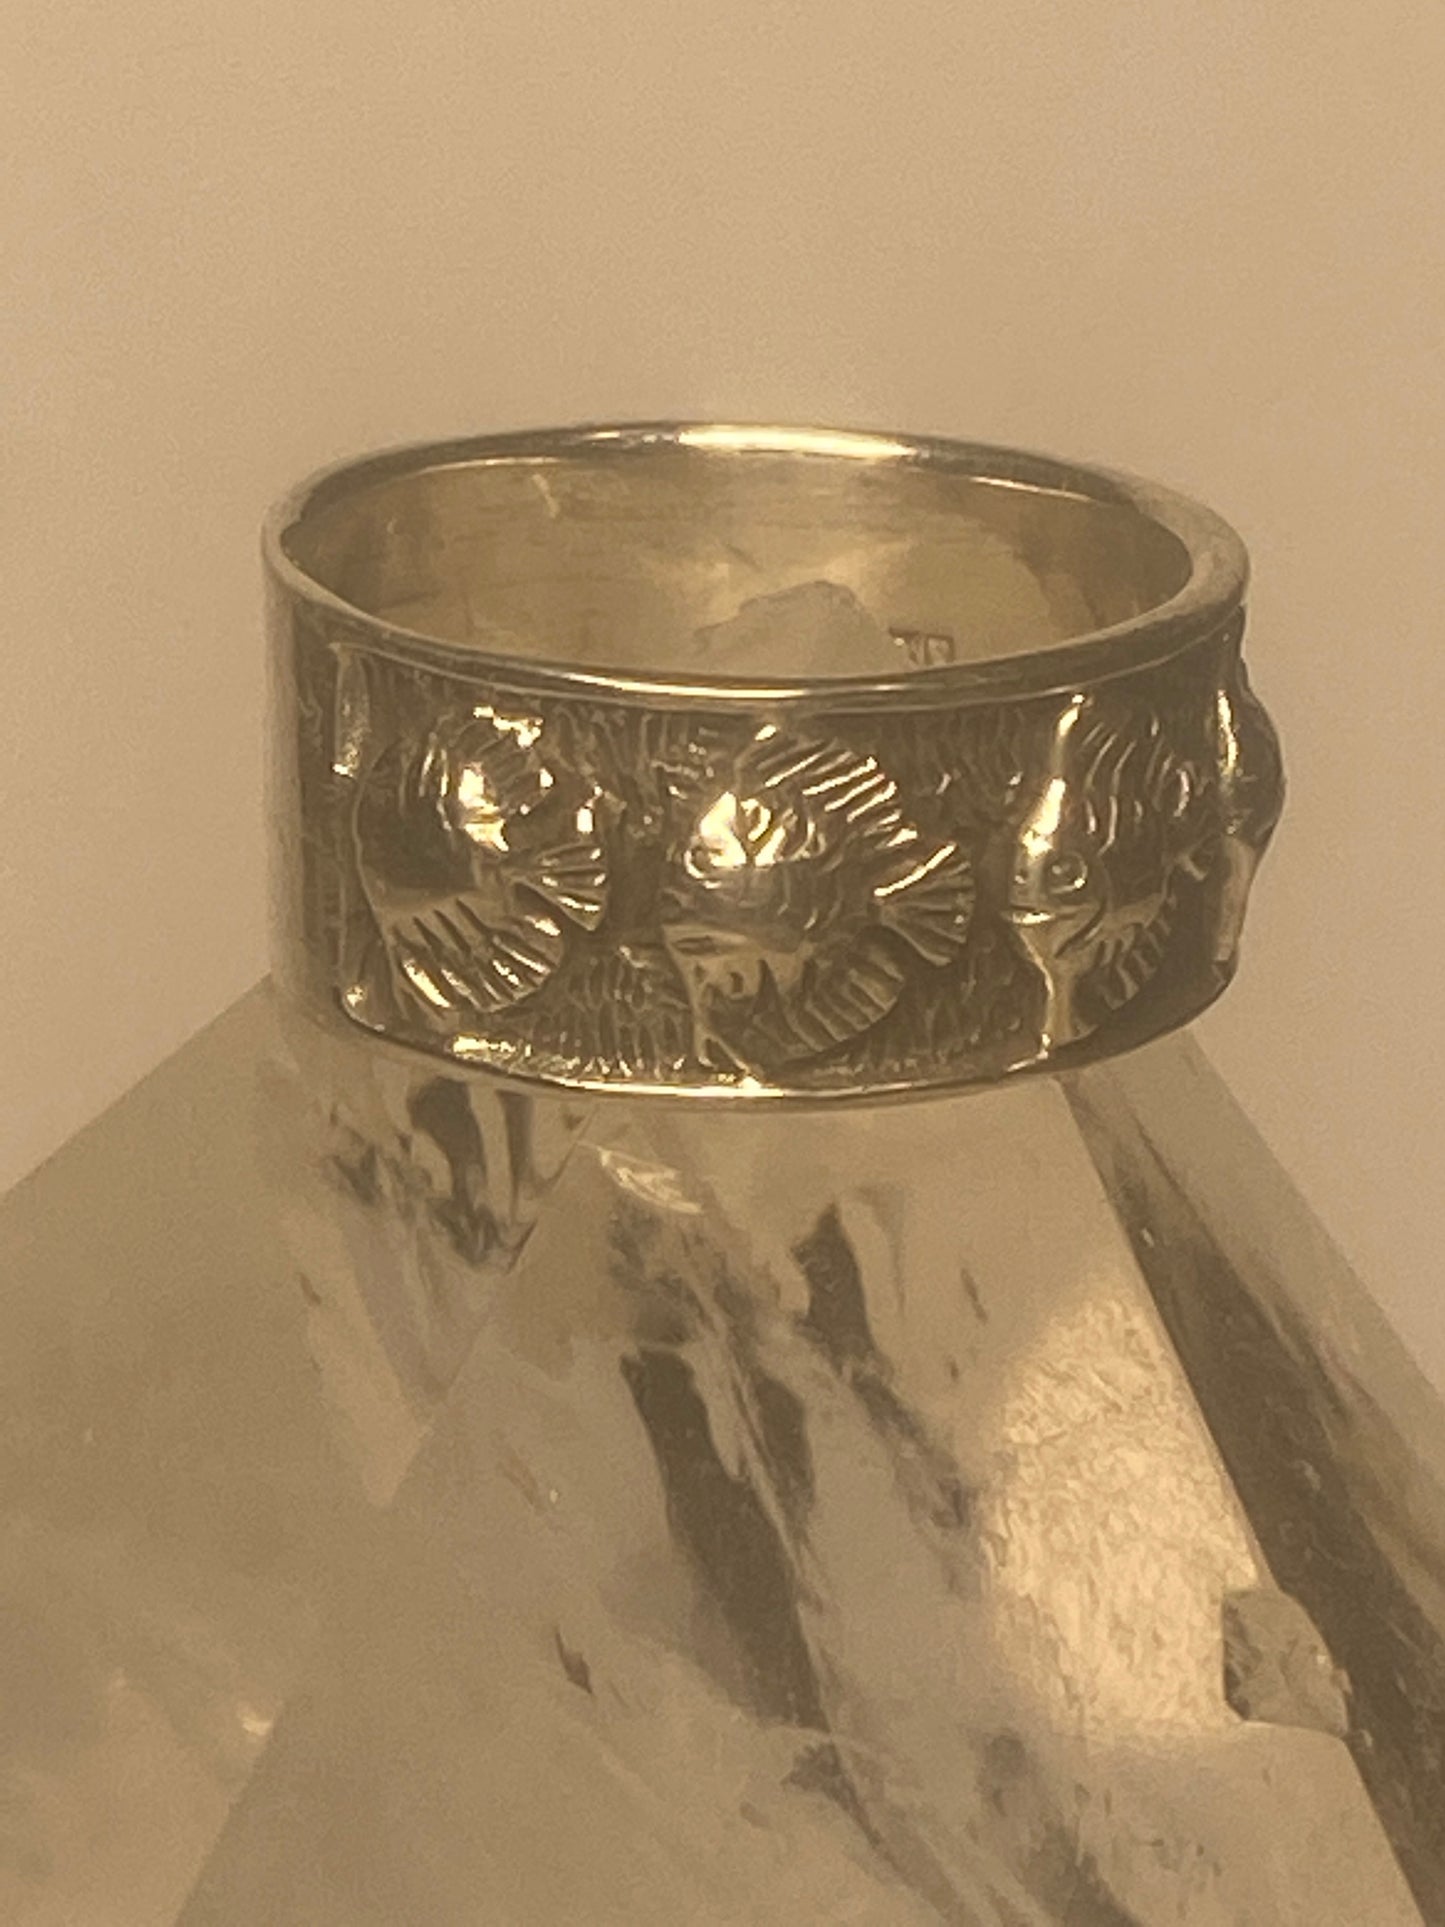 Fish Ring Fishes band sterling silver